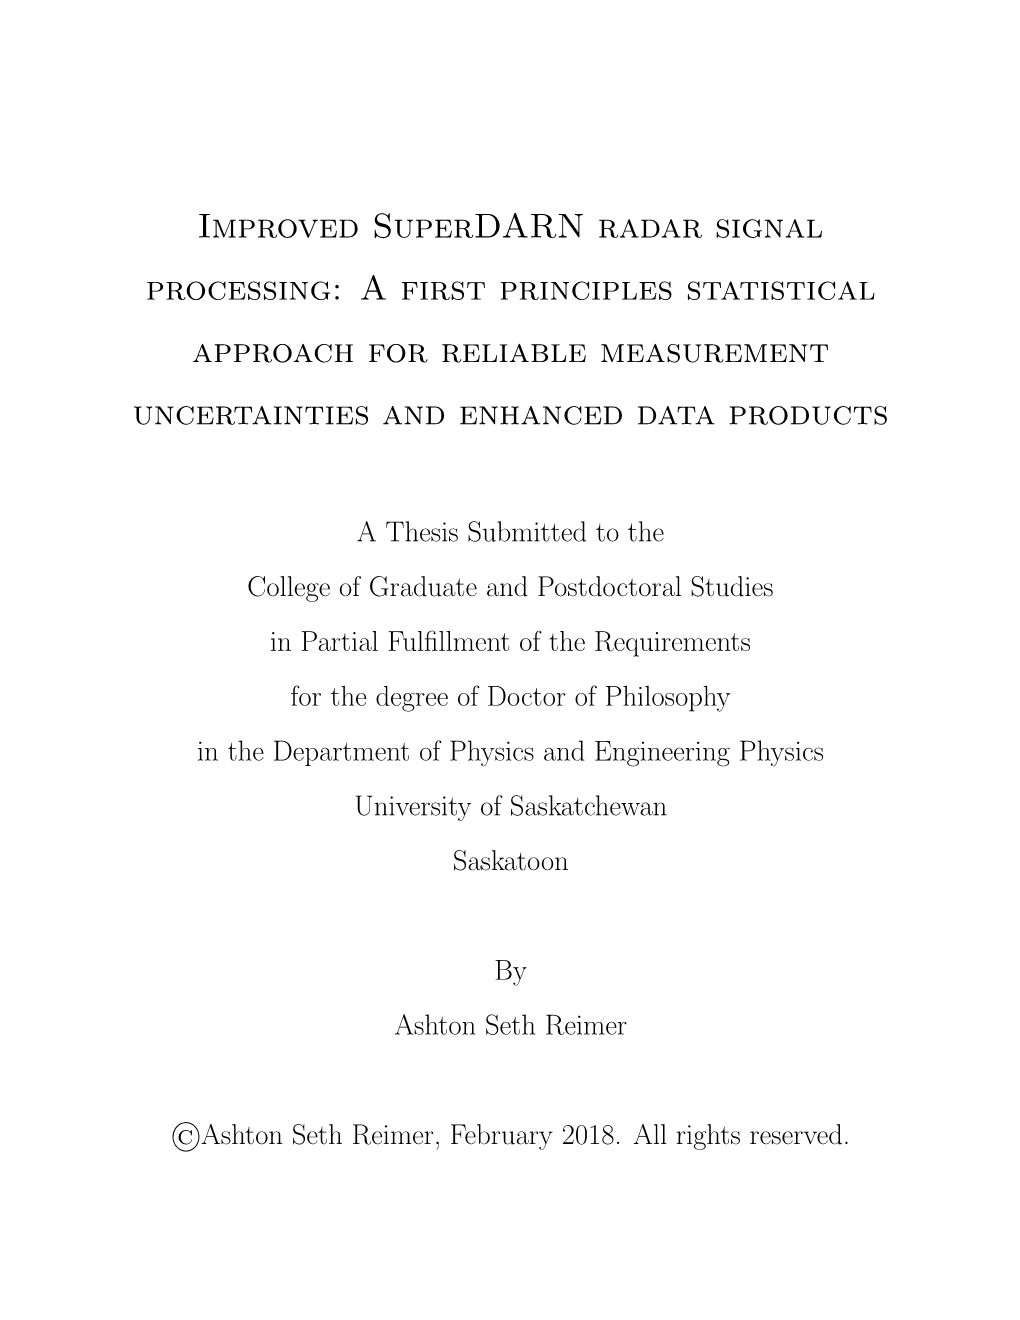 Improved Superdarn Radar Signal Processing: a First Principles Statistical Approach for Reliable Measurement Uncertainties and Enhanced Data Products